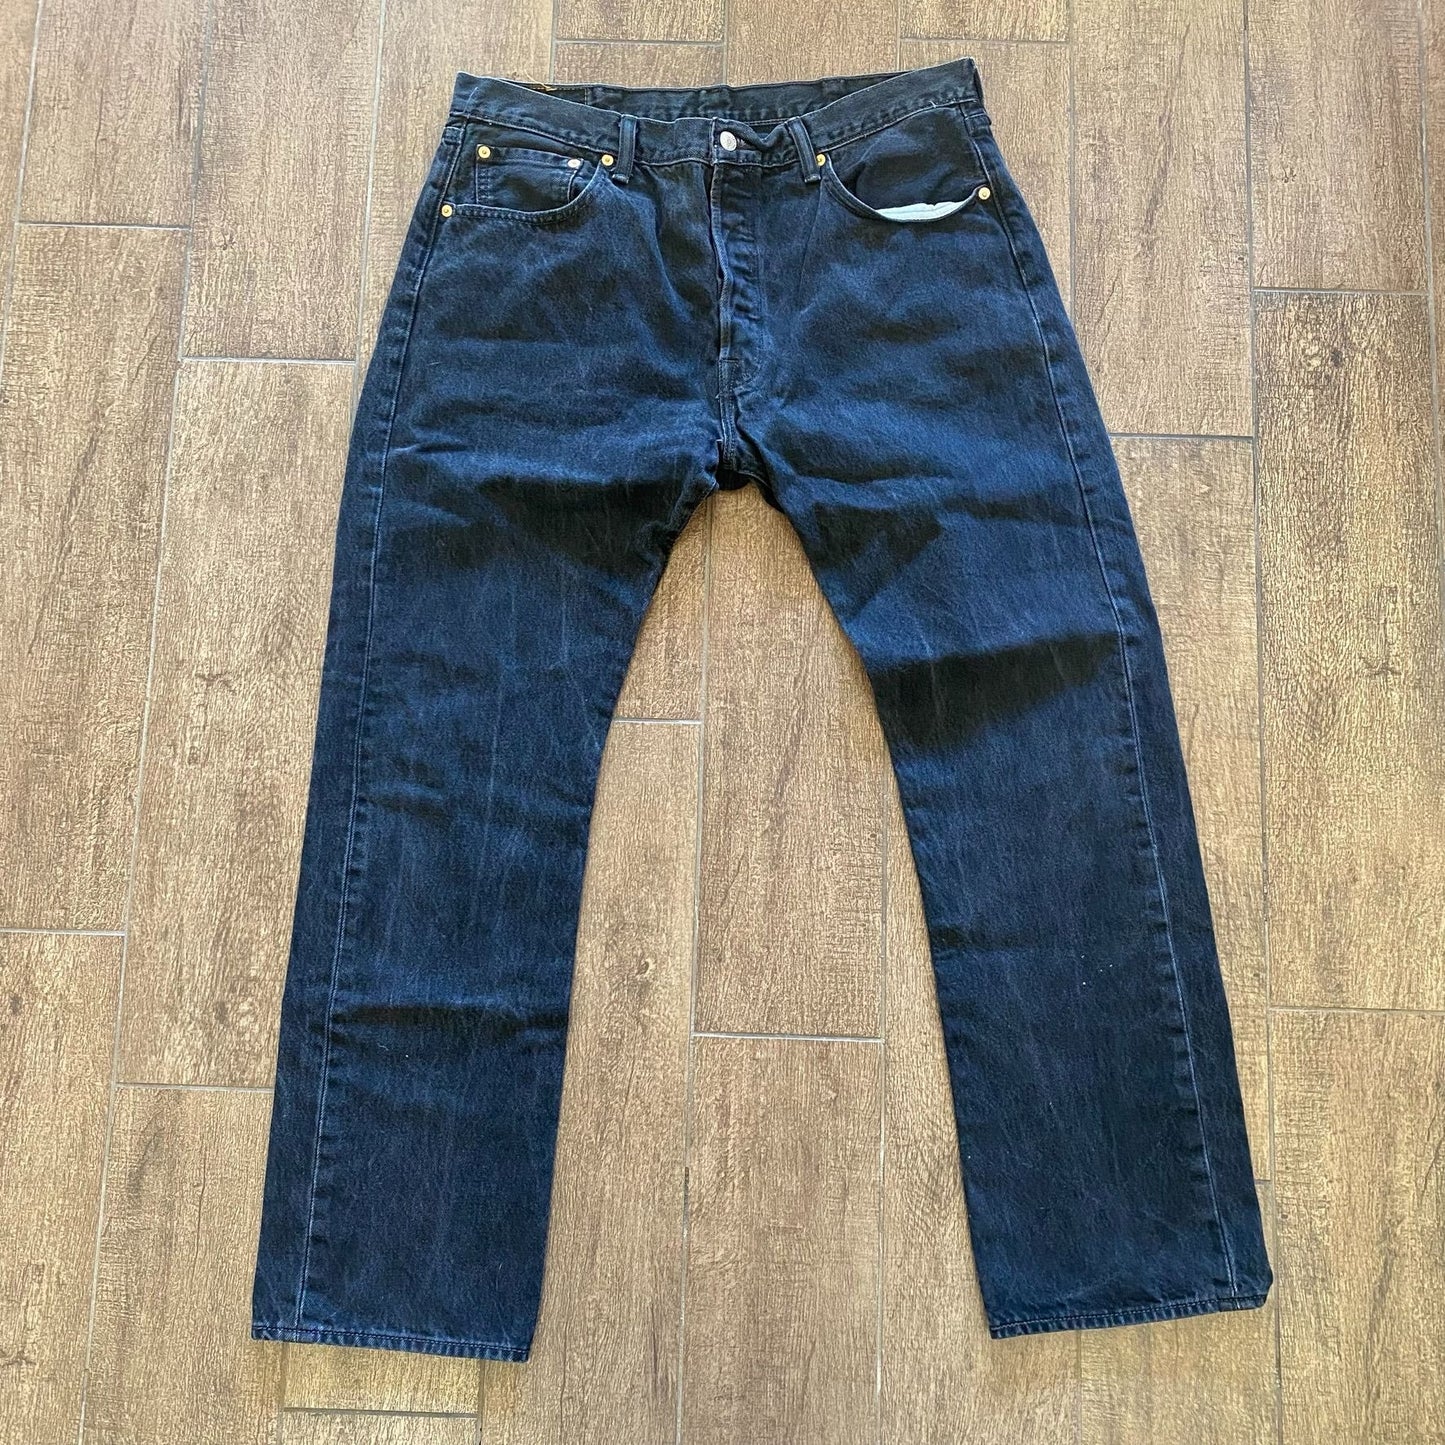 Levi 501 Straight Fit Jeans 38x32